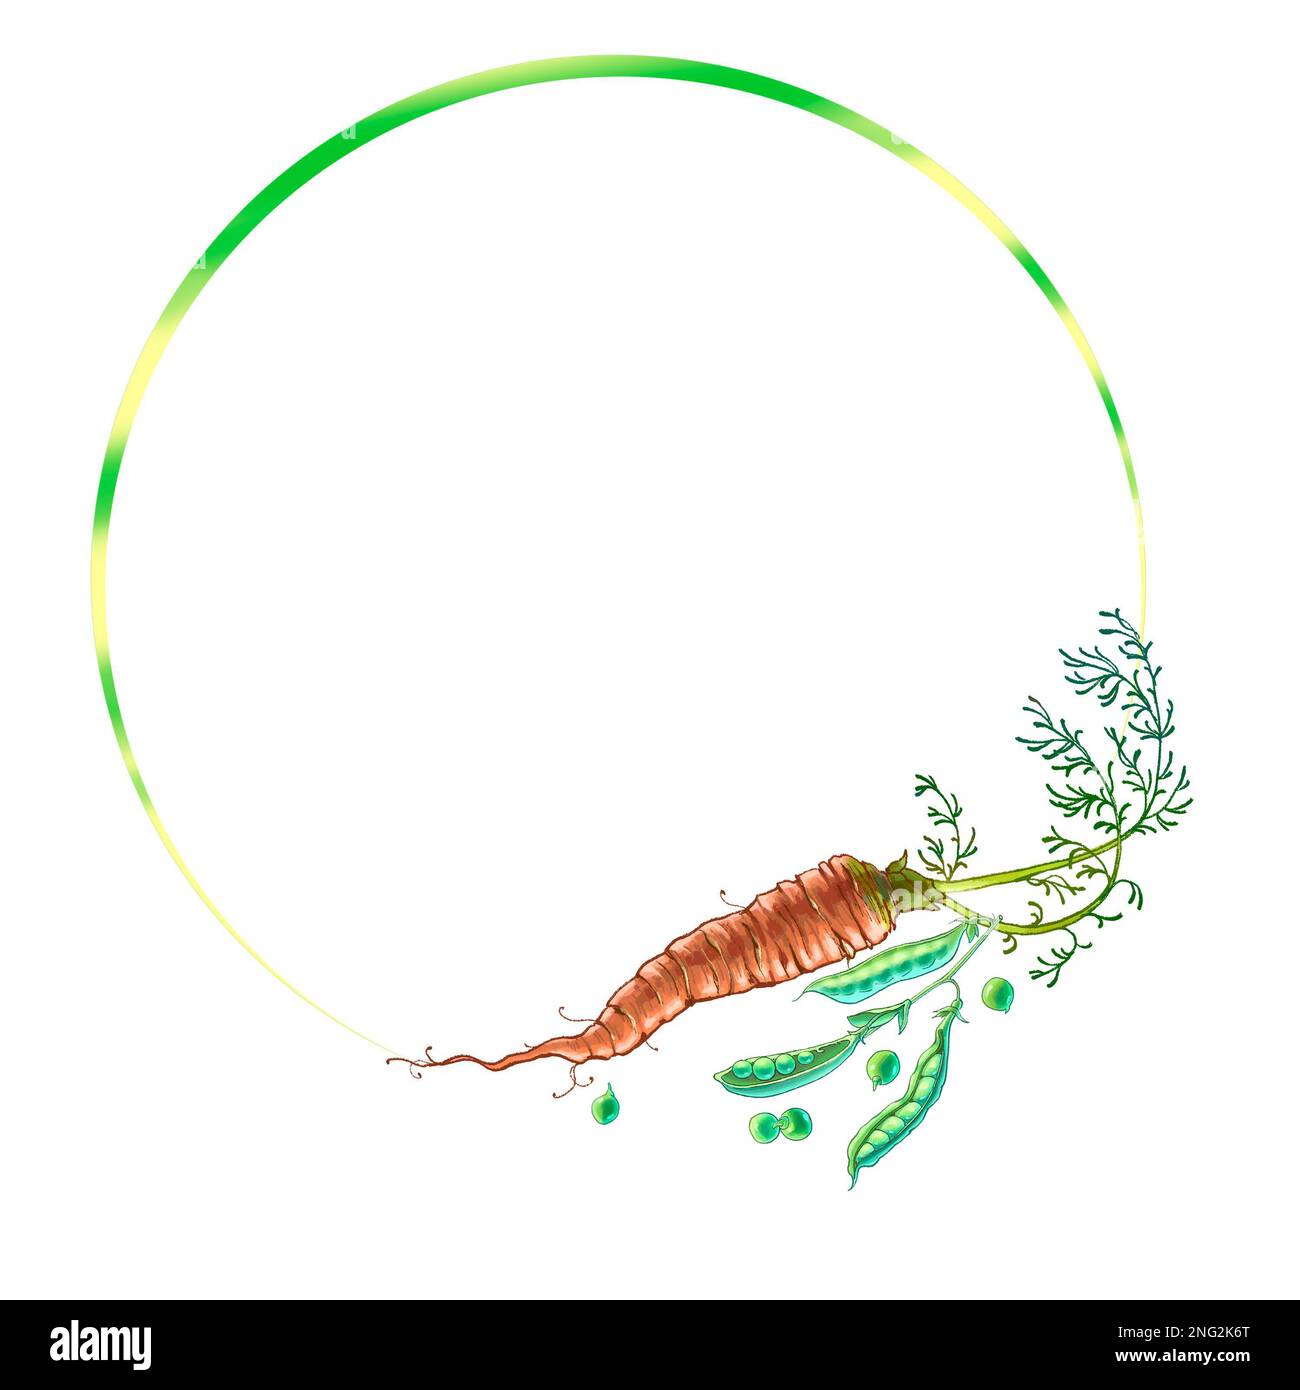 Round frame with carrot illustration. High quality illustration Stock Photo